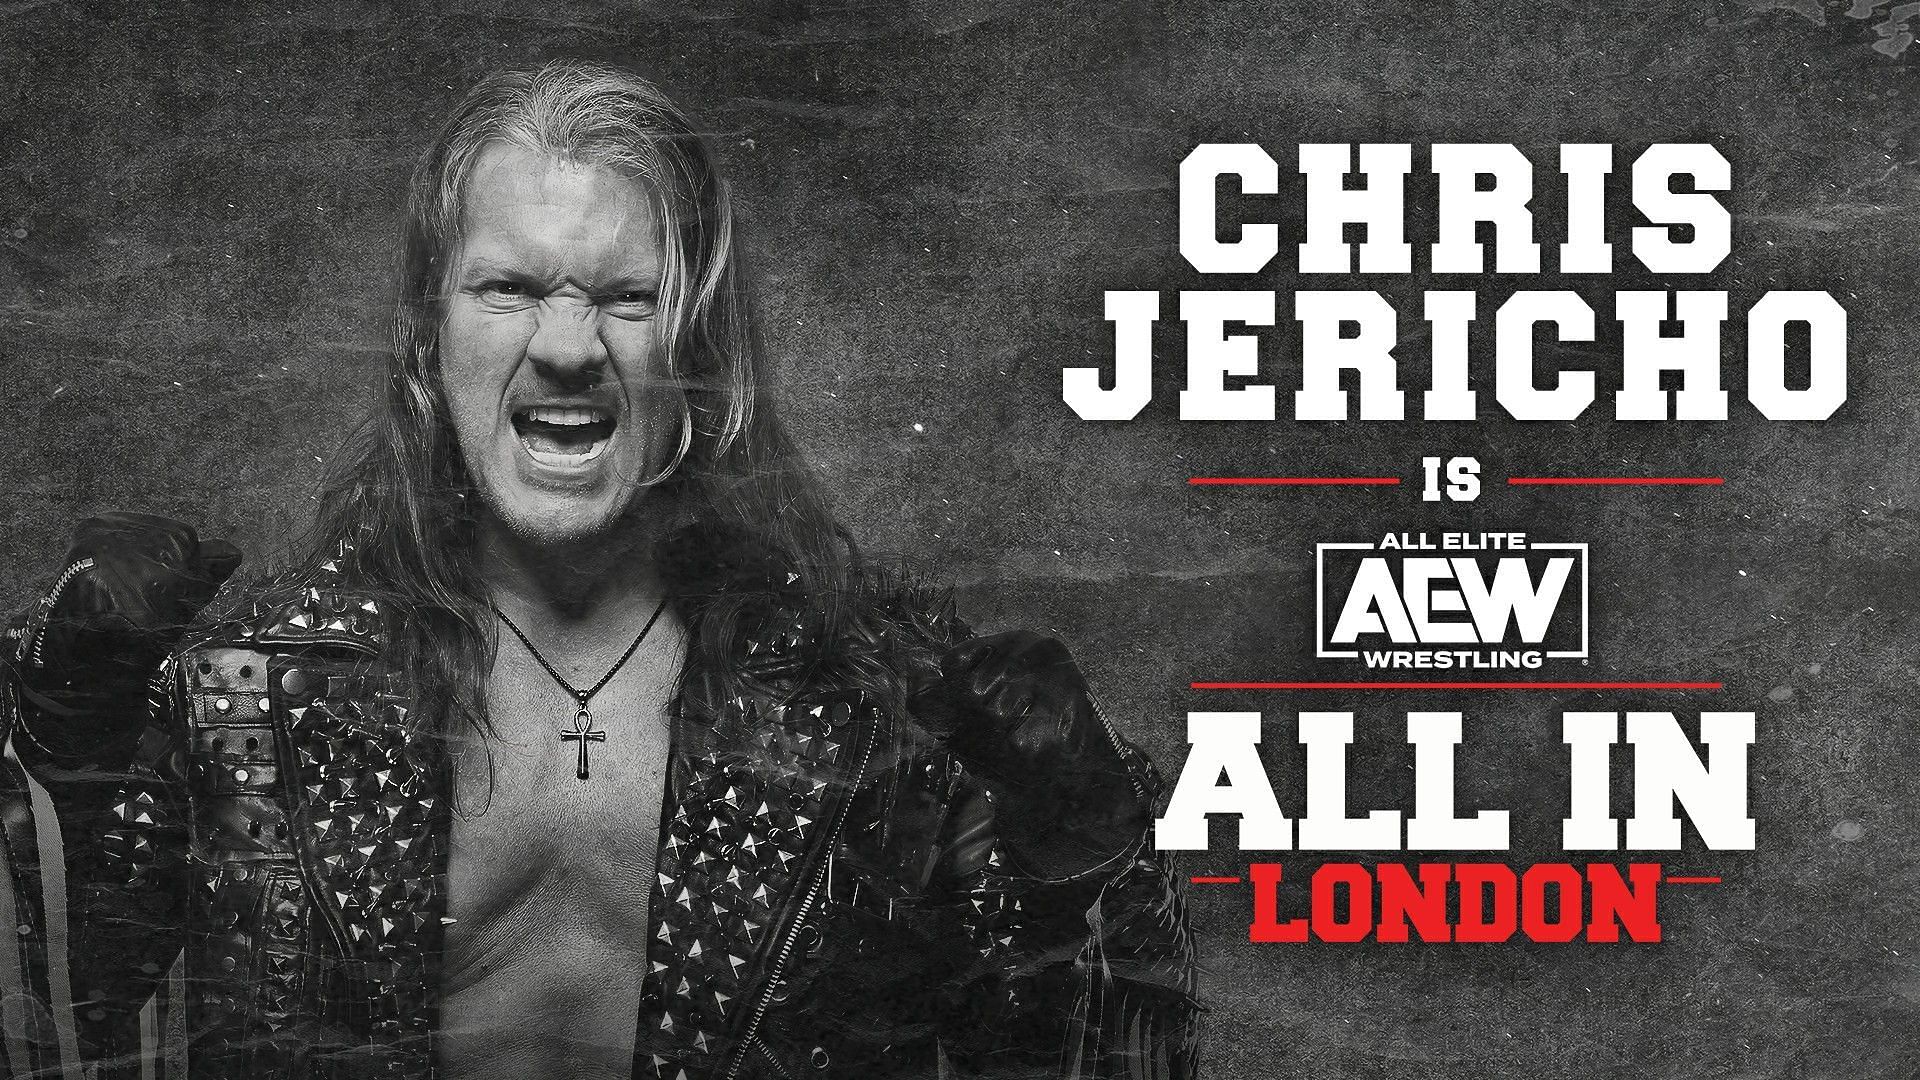 Chris Jericho put on quite a show at AEW All In.